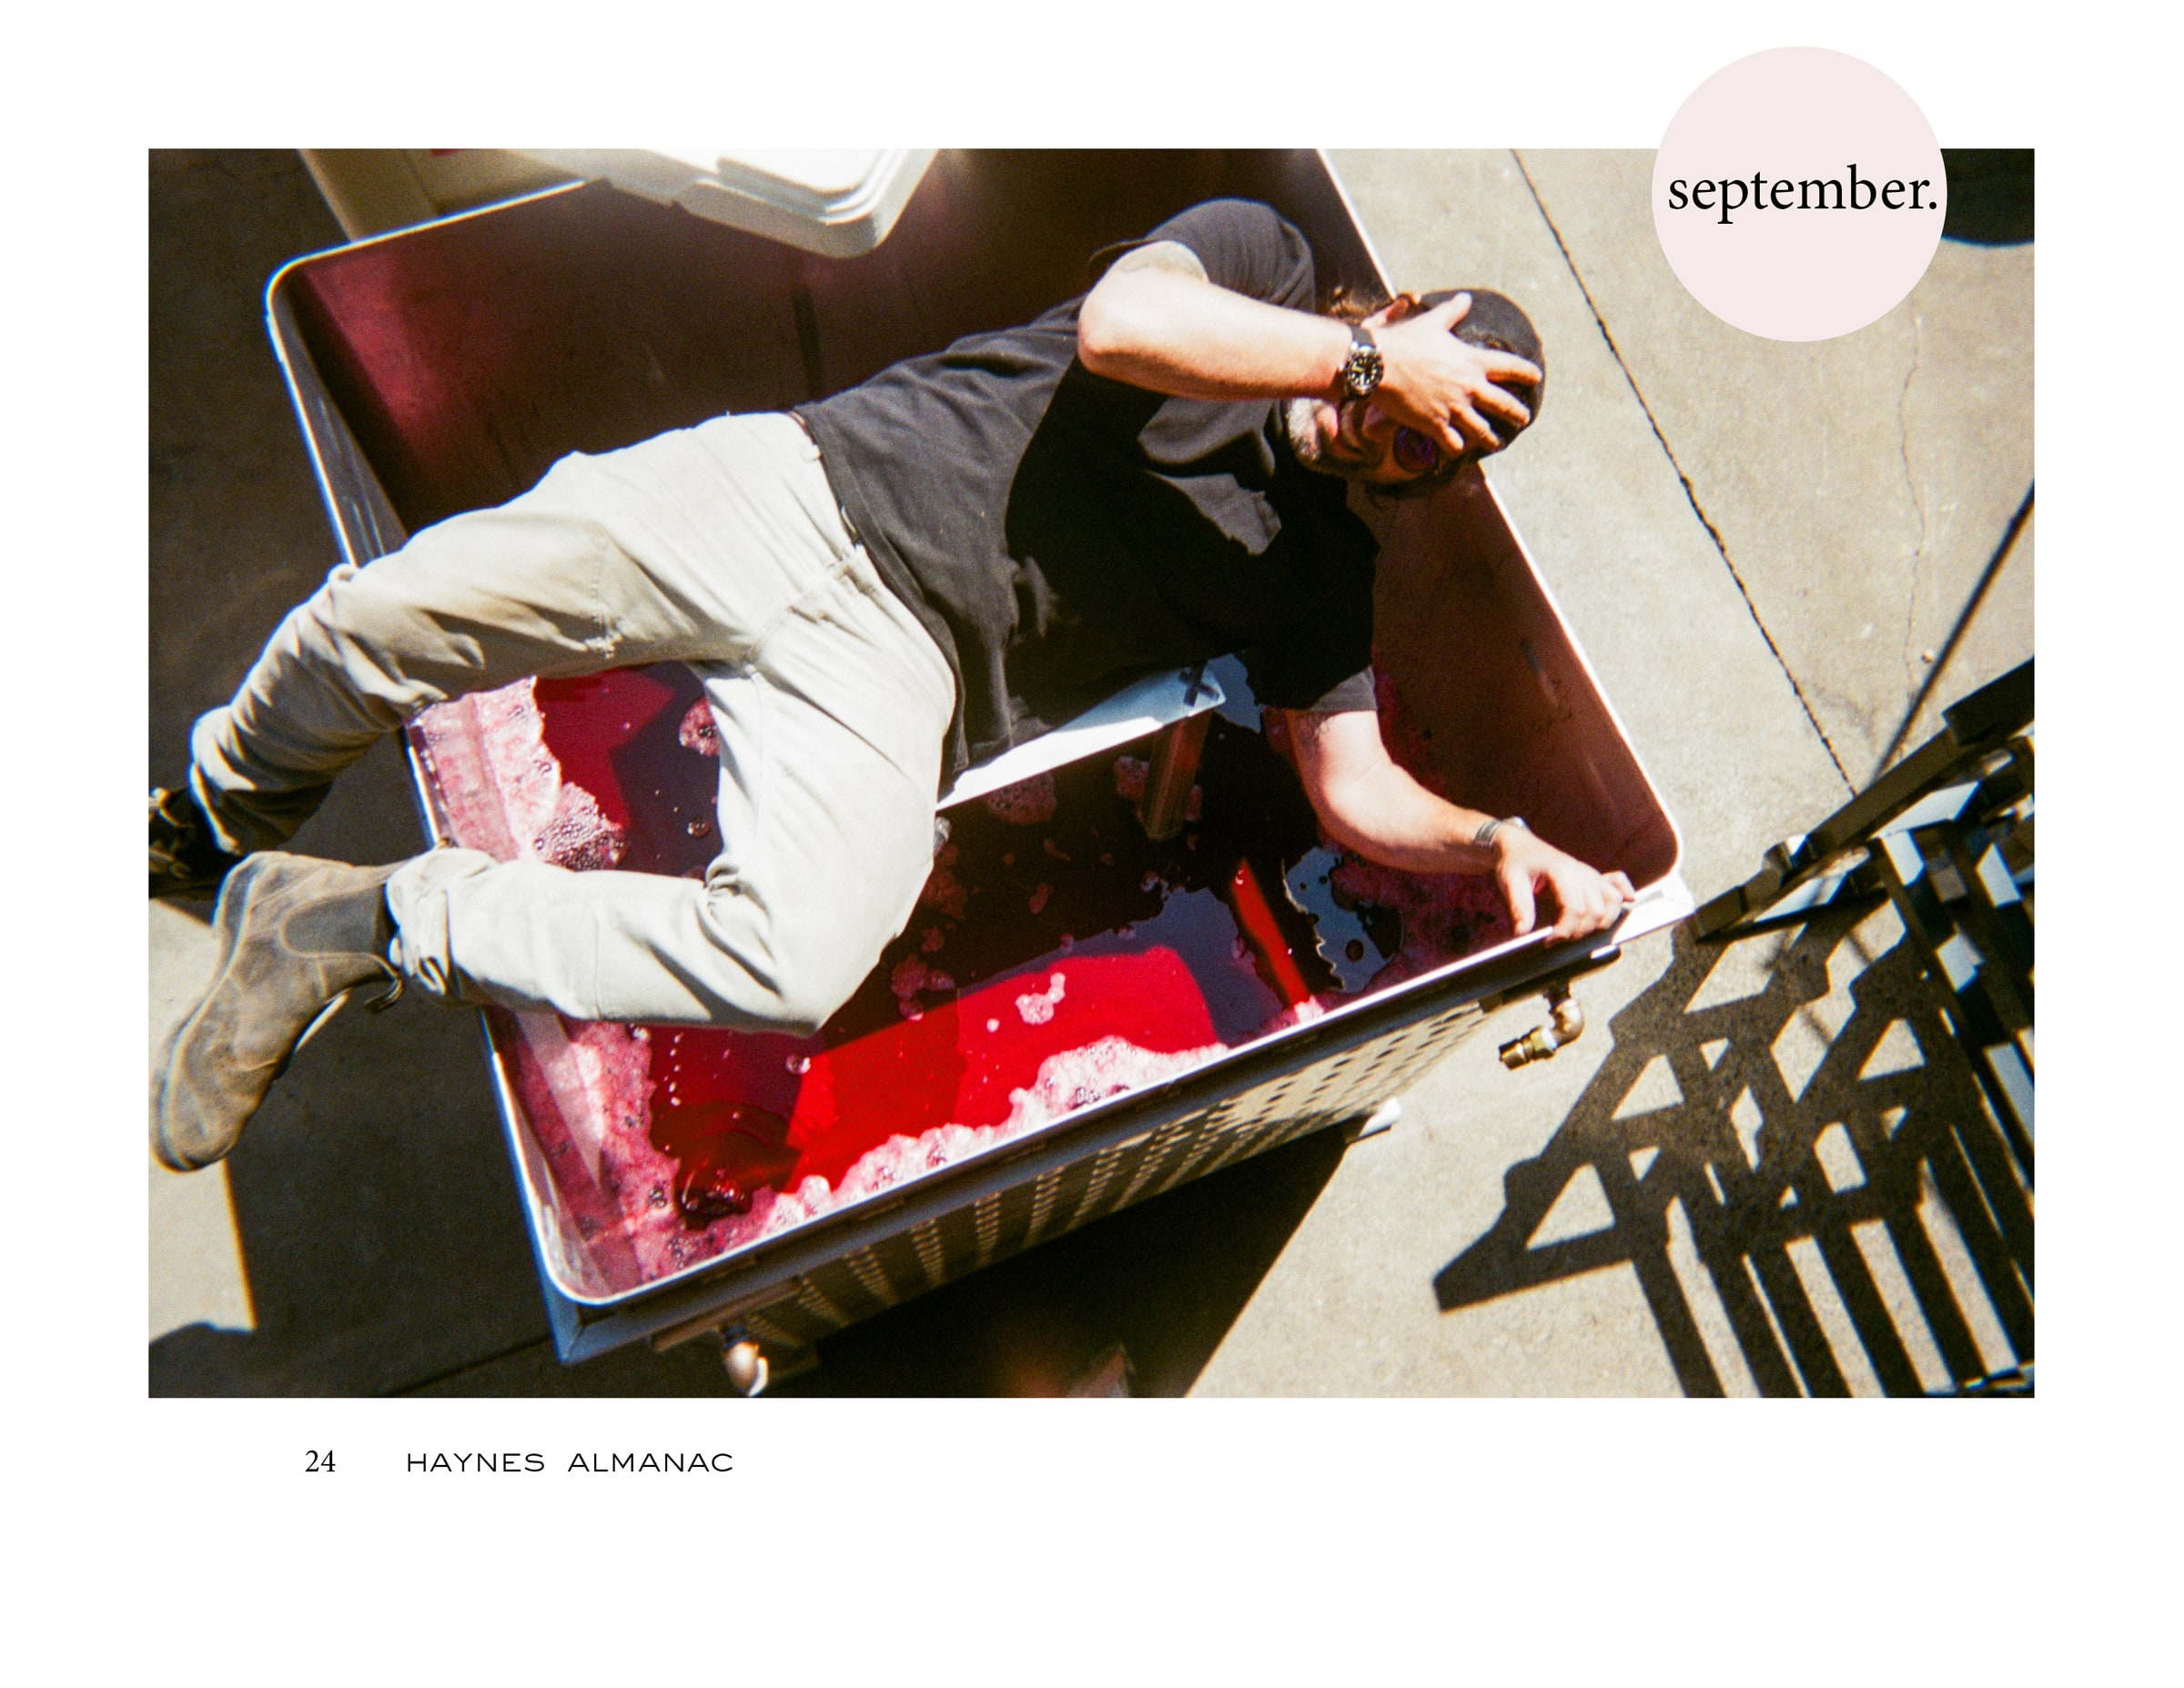 Man laying on top of a harvest vin full of red grape juice